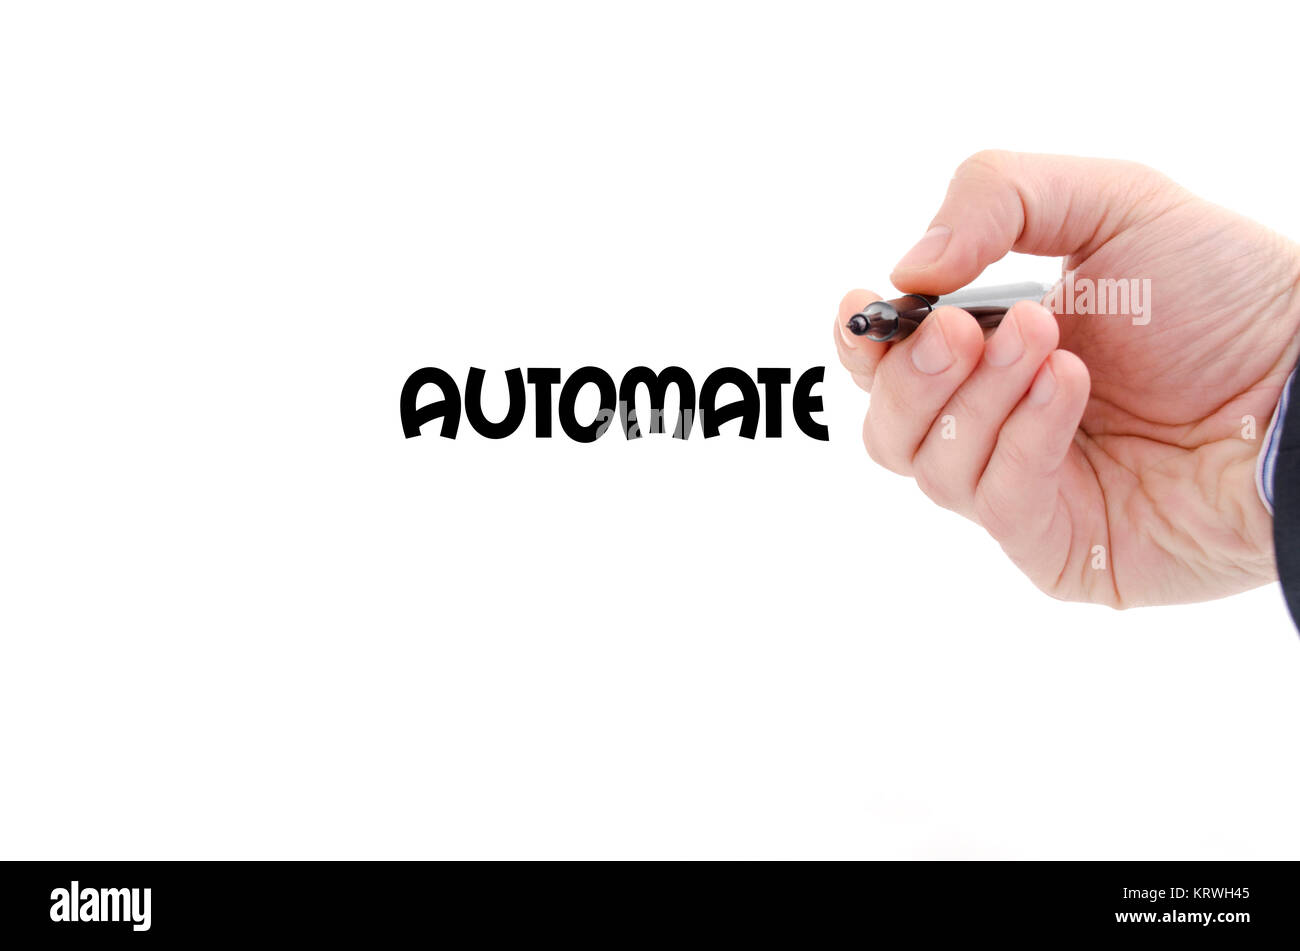 Automate text concept Stock Photo